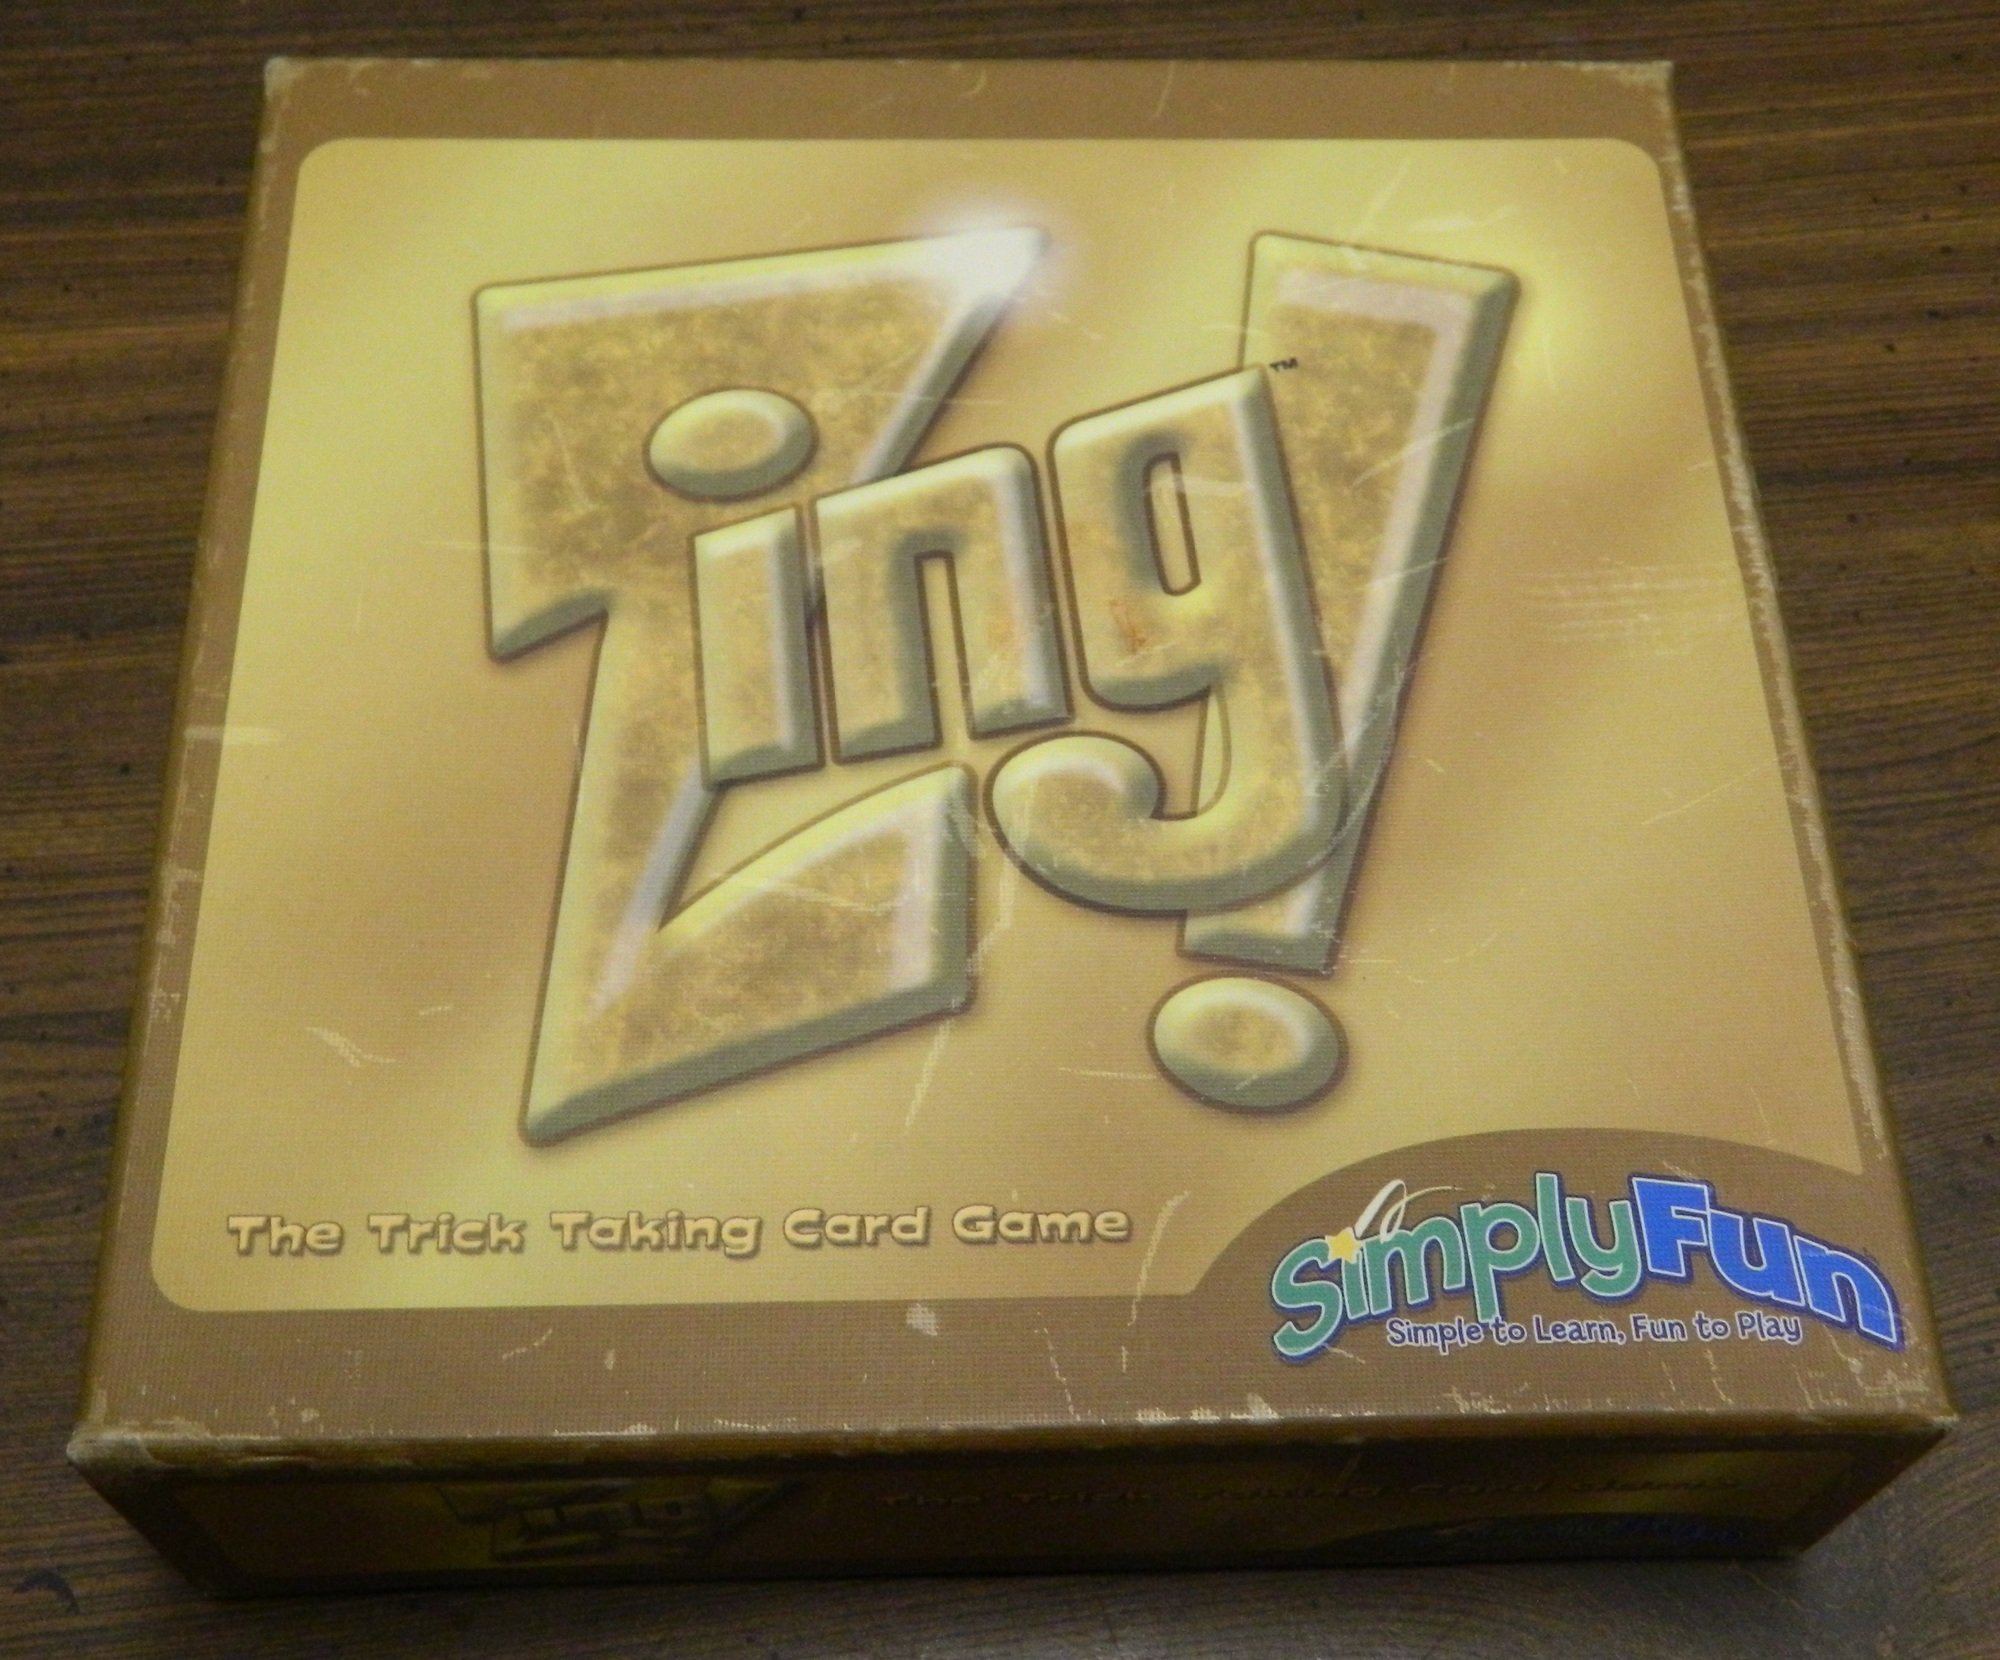 Zing! AKA Wizard Extreme Card Game Review and Rules